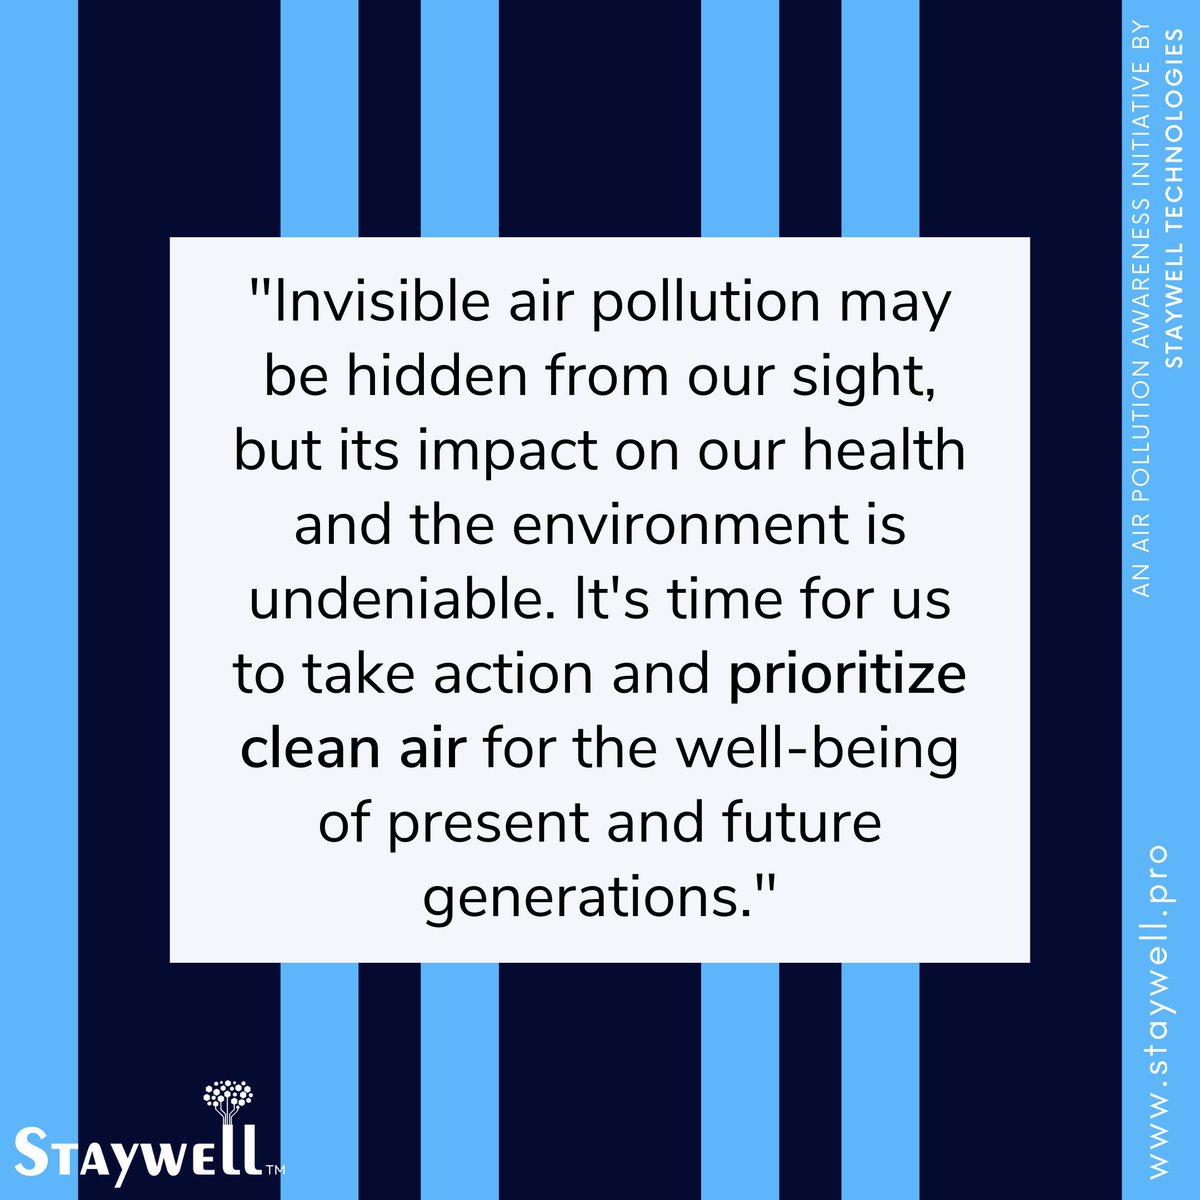 #CleanAirNow #BeatAirPollution #InvisibleKiller #AirQualityMatters #BreatheEasy #PollutionFree #AirPollutionAwareness #HealthyAir #SustainableLiving #ProtectOurPlanet #AirPollution #Staywell #StaywellTechnologies #WearableAirPurifier